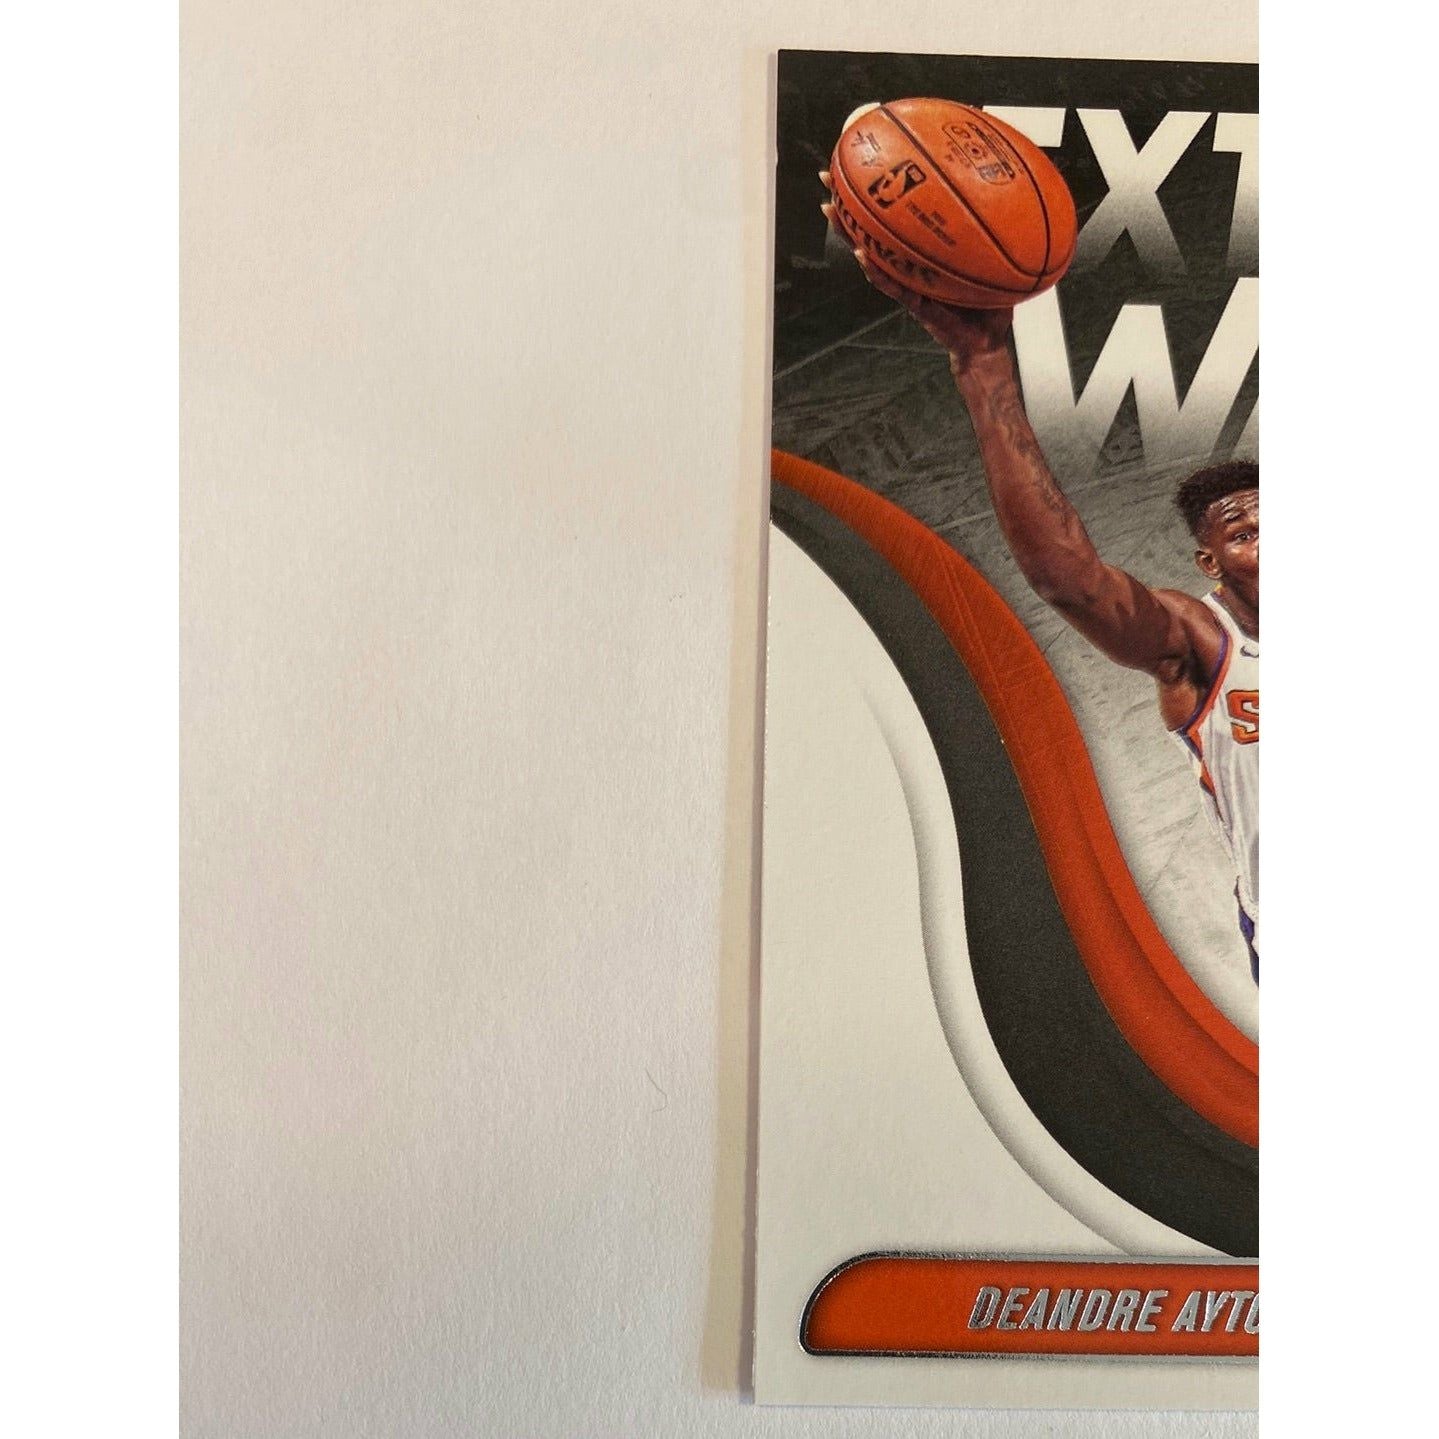  2018-19 Panini Threads DeAndre Ayton Next Wave  Local Legends Cards & Collectibles